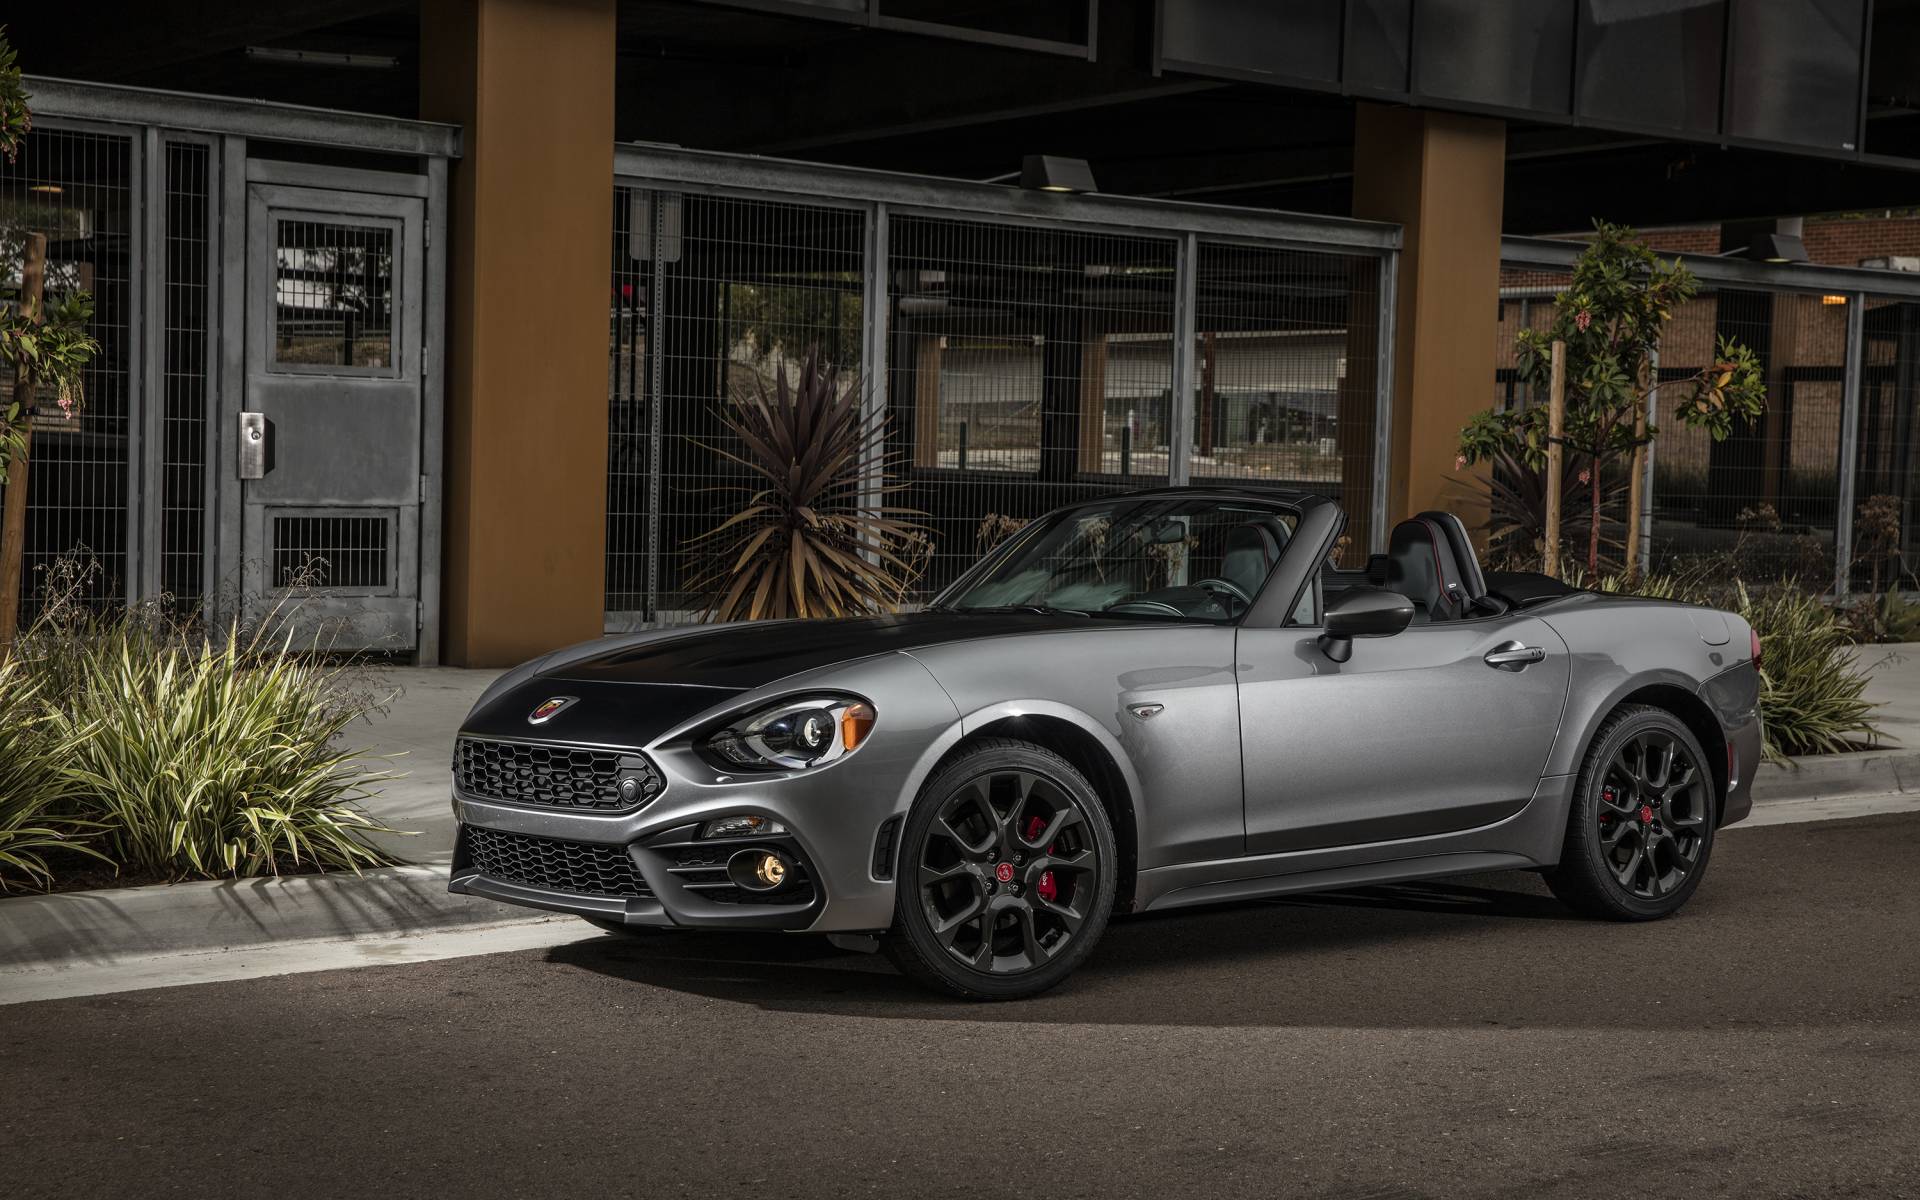 2019 Fiat 124 Spider Rating - The Car Guide